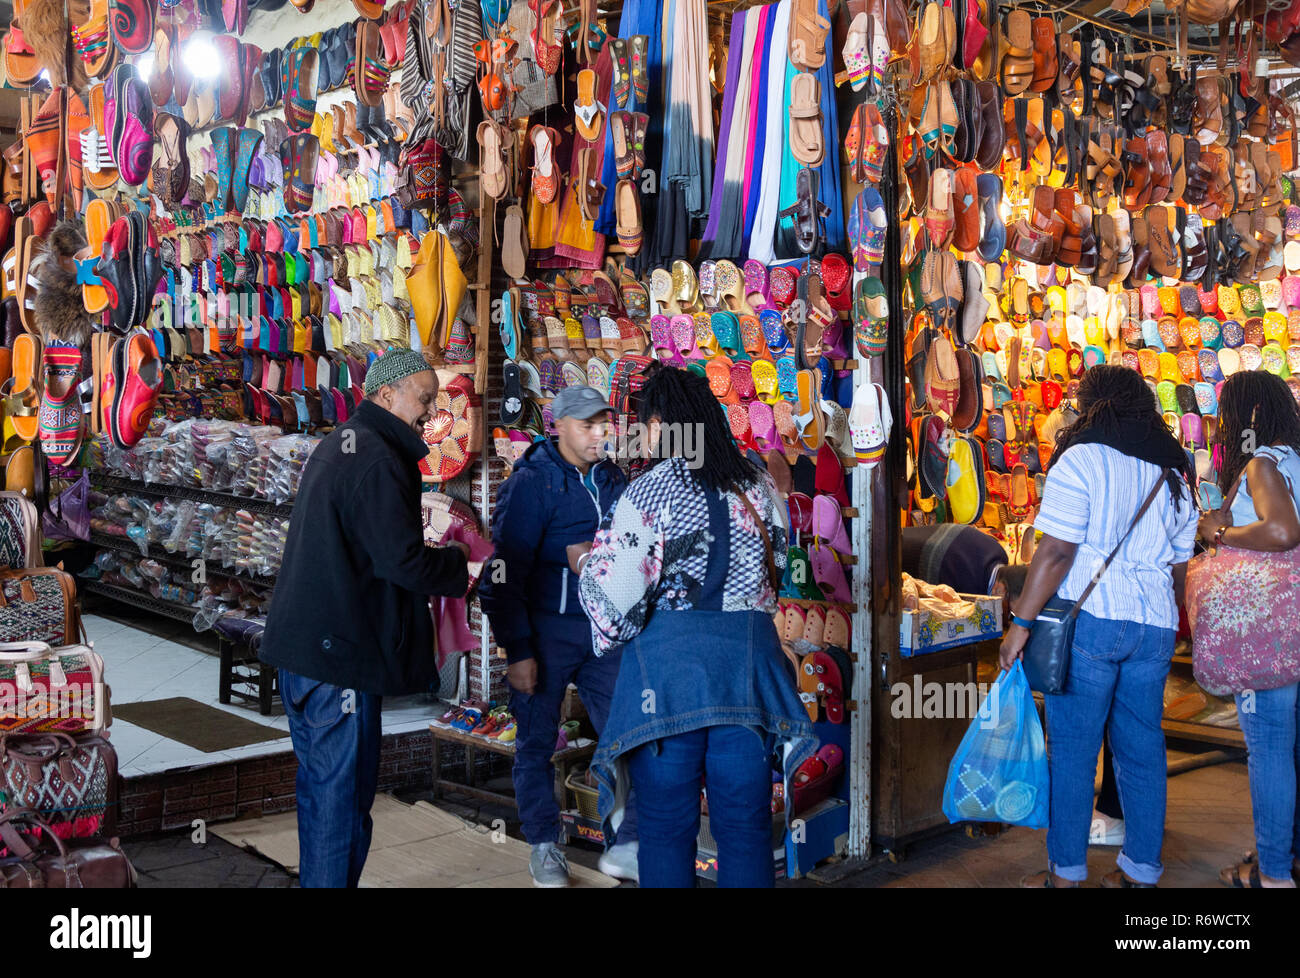 Marrakech souk - Women shopping in the medina, Marrakech, buying colourful shoes and slippers, Marrakesh, Morocco Africa Stock Photo